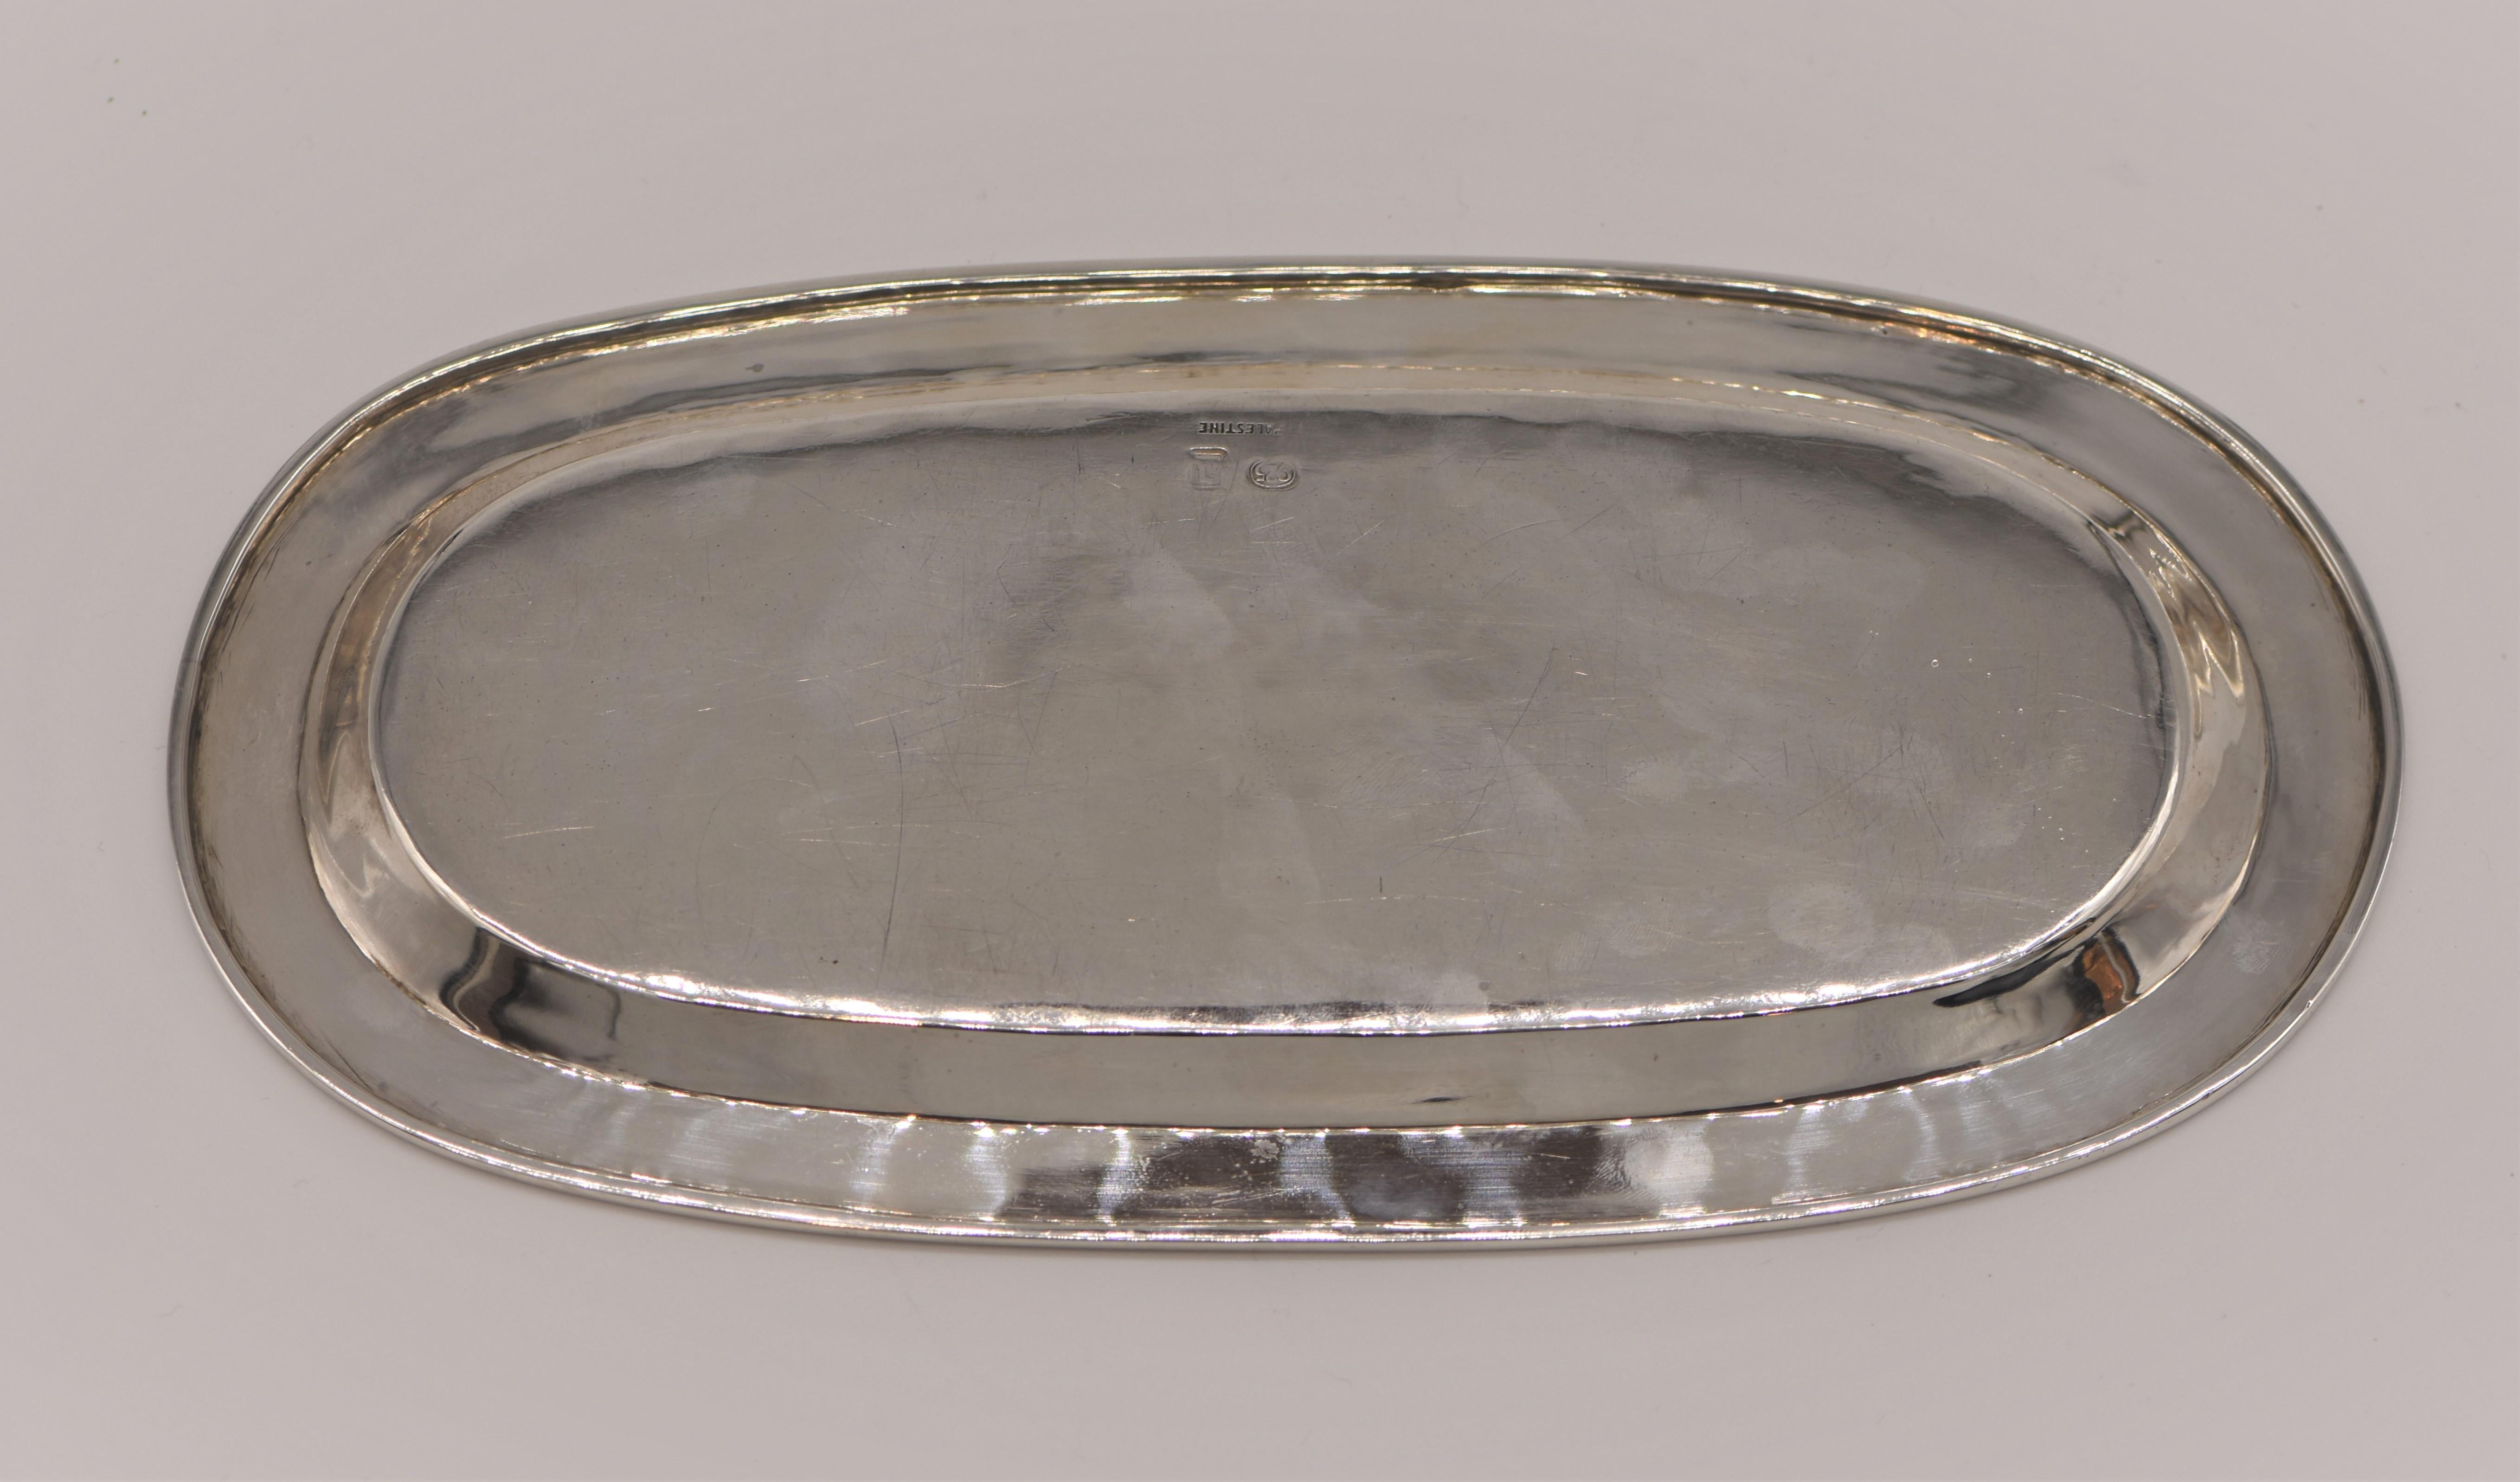 Hand hammered oval silver tray by David Heinz Gumbel, circa 1940.
Signed on the bottom with David Gumbel's hallmark, 925 for sterling silver, and 